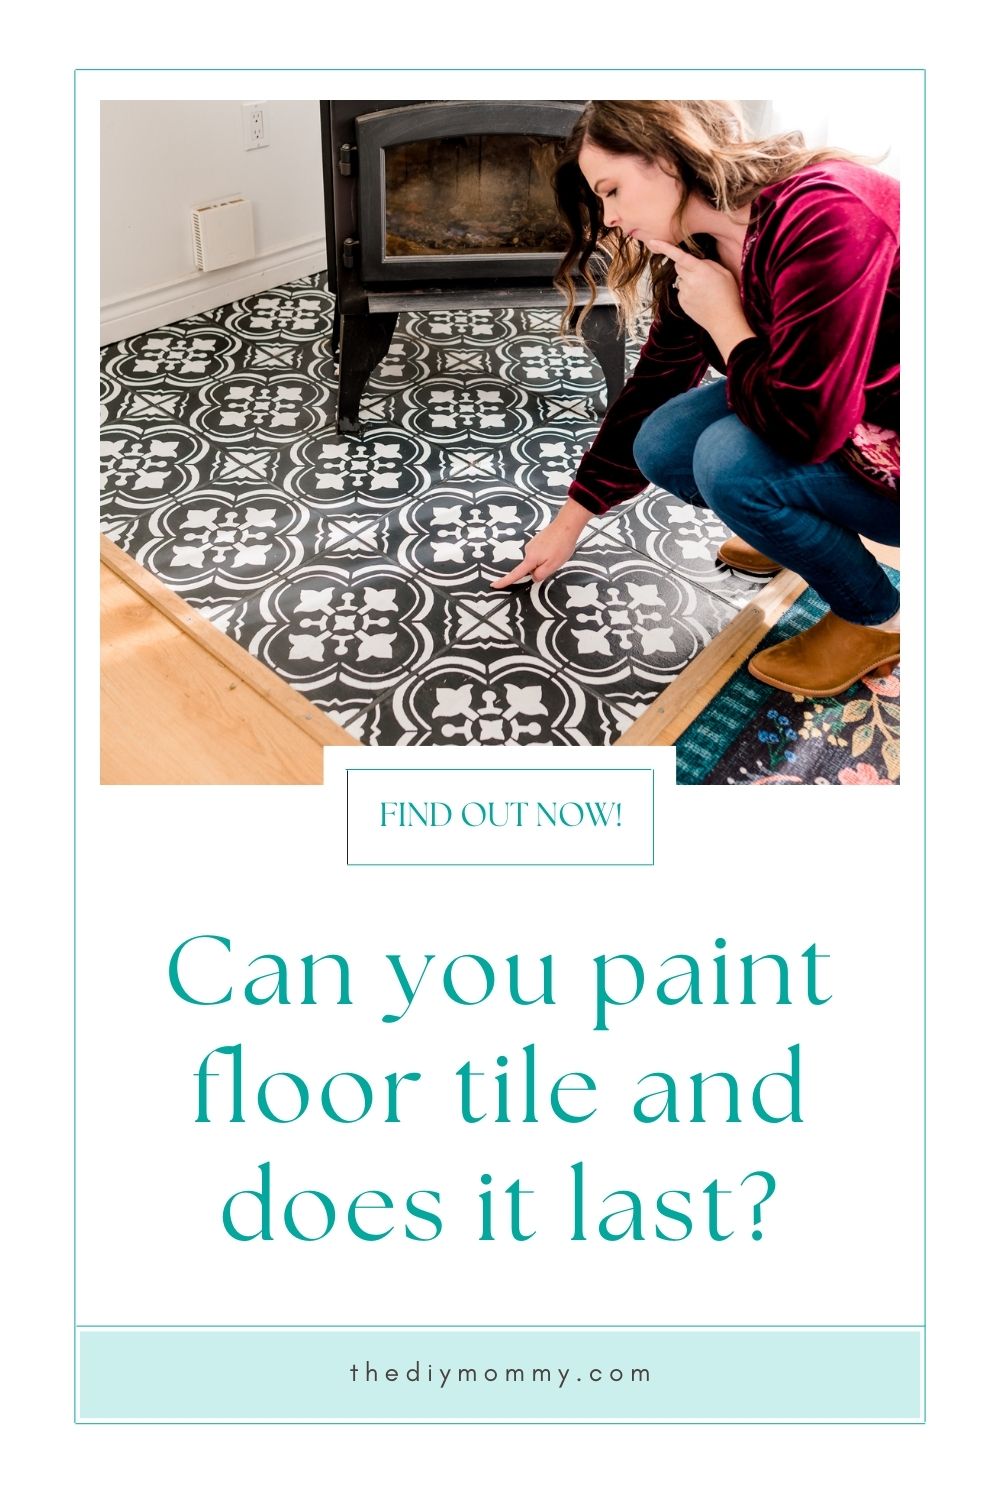 Learn how I painted floor tile and how long it's lasted so far.